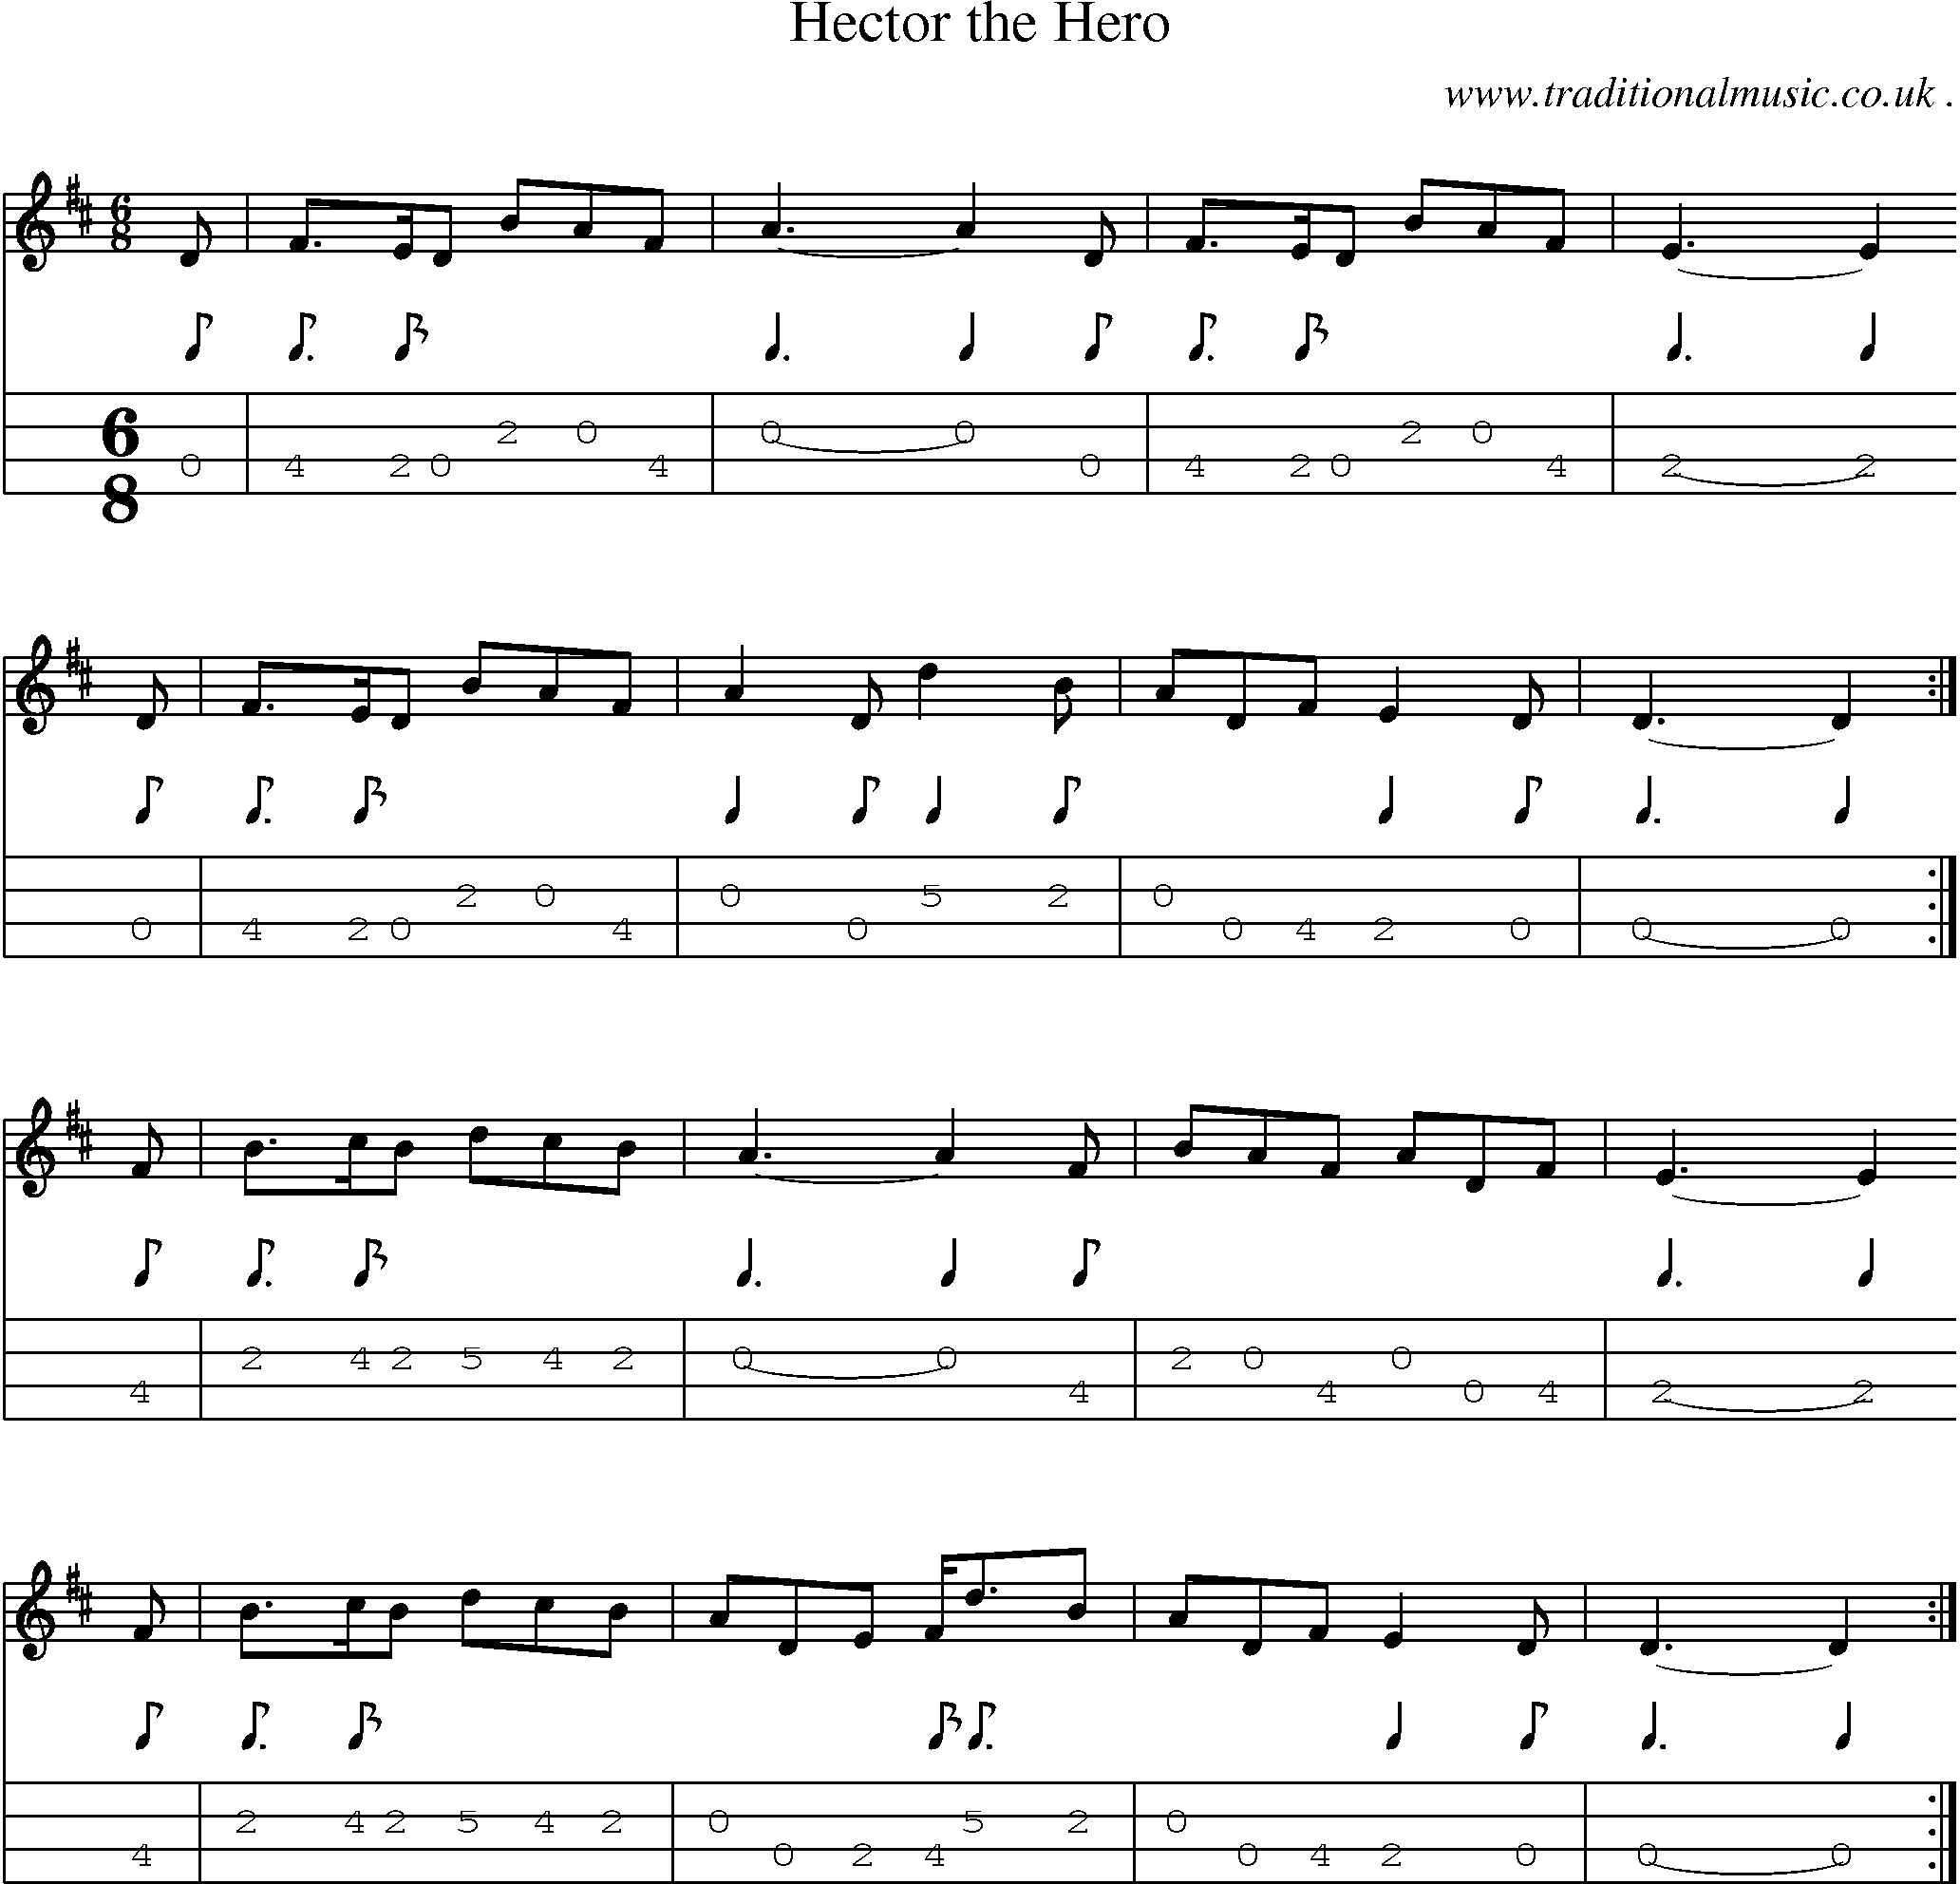 Sheet-music  score, Chords and Mandolin Tabs for Hector The Hero